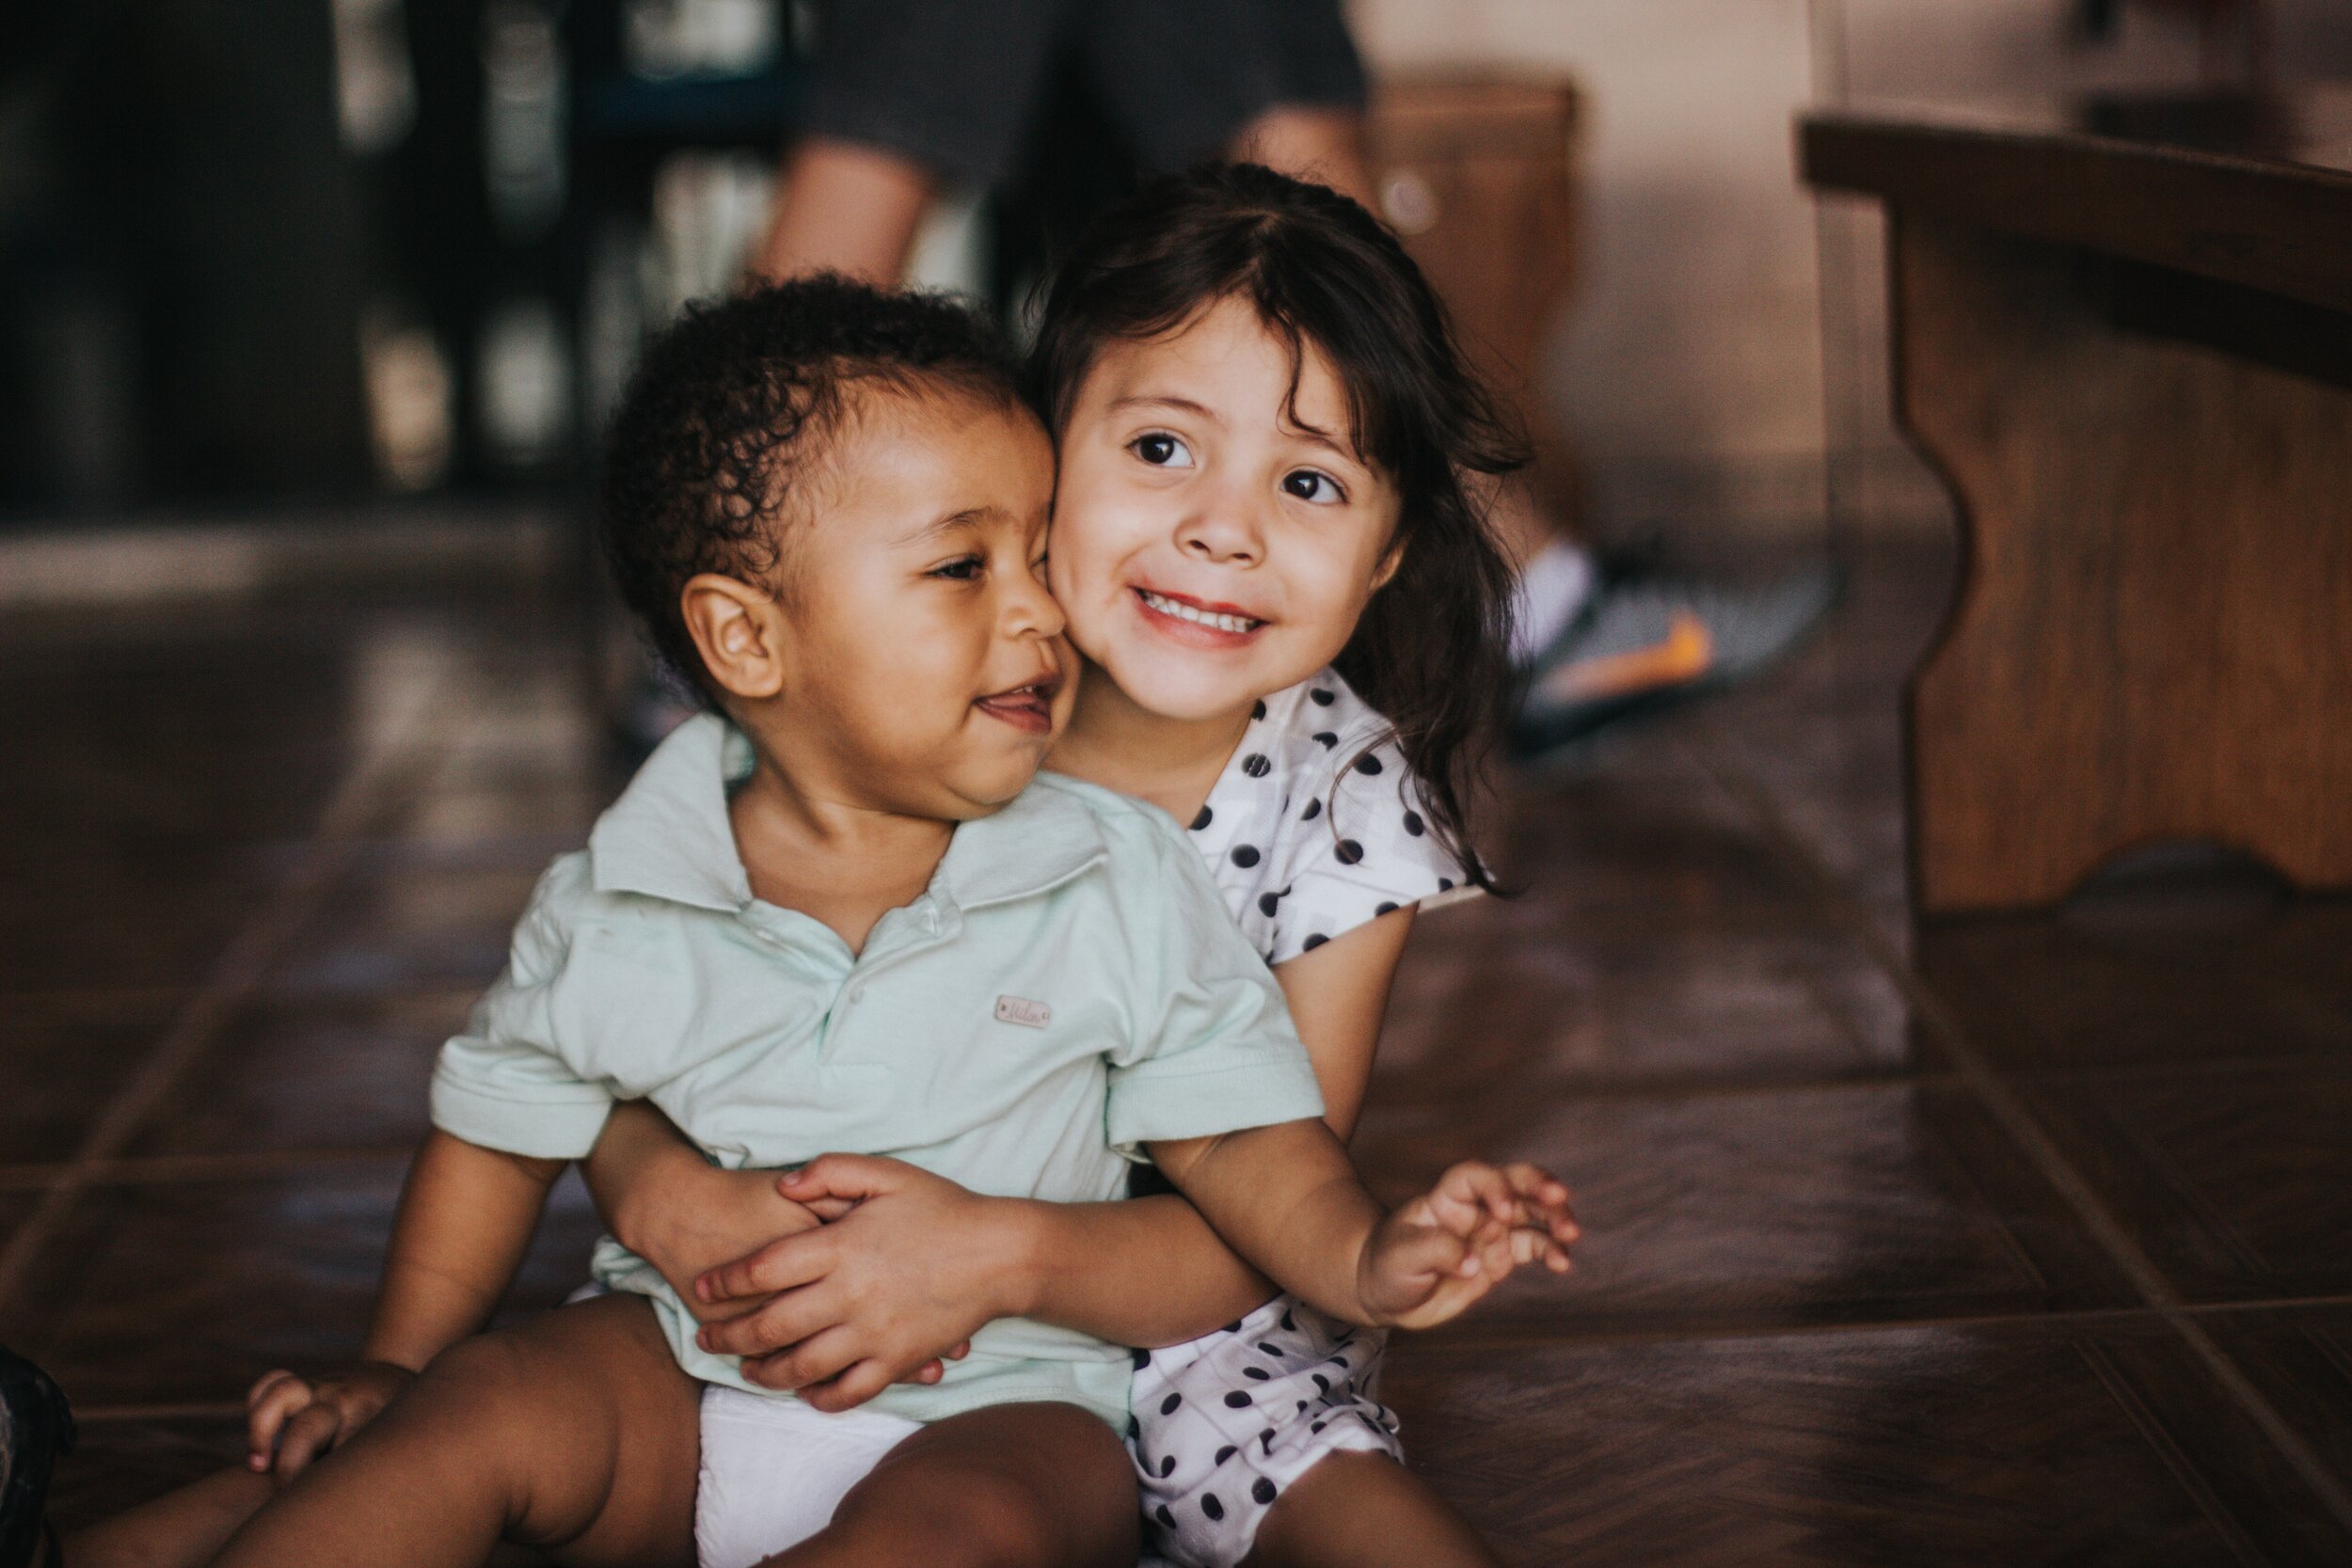   Child Care Network   Promoting the success of children, families and our community through quality child care education, advocacy and family support   Learn More  